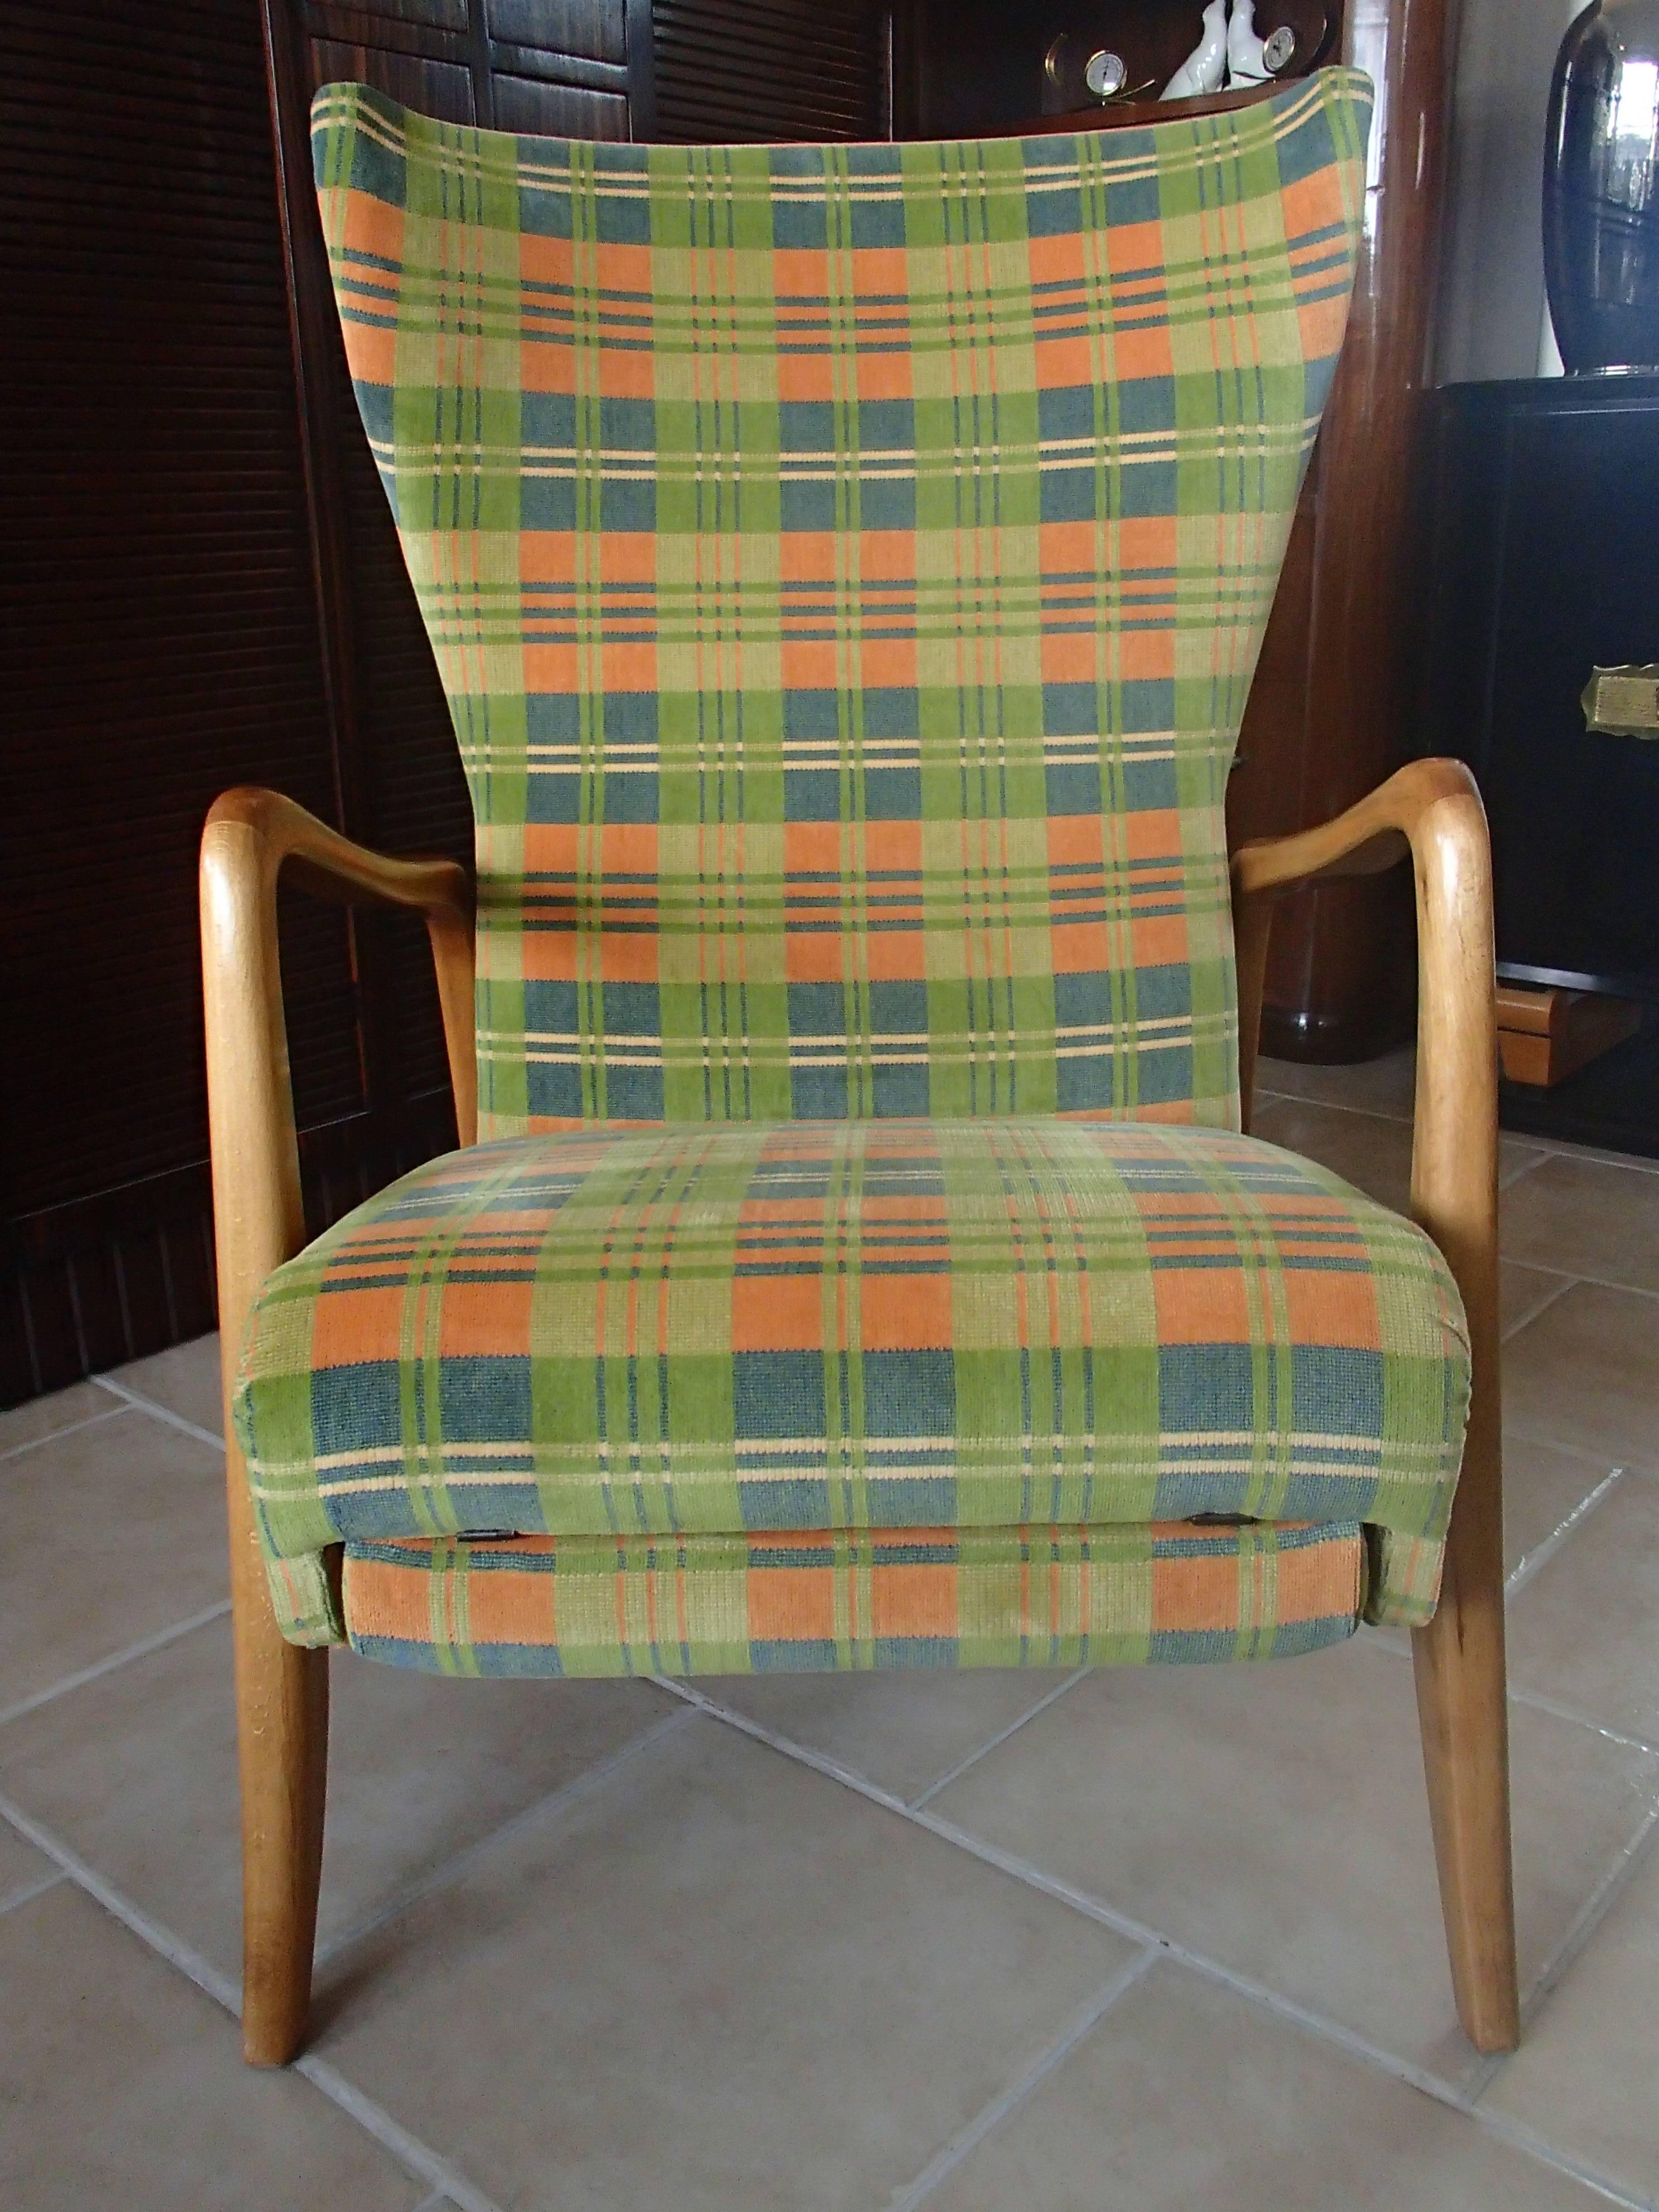 New reupholstered and recovered with a period green and orange velvet. Very comfortable and easy to lay down.